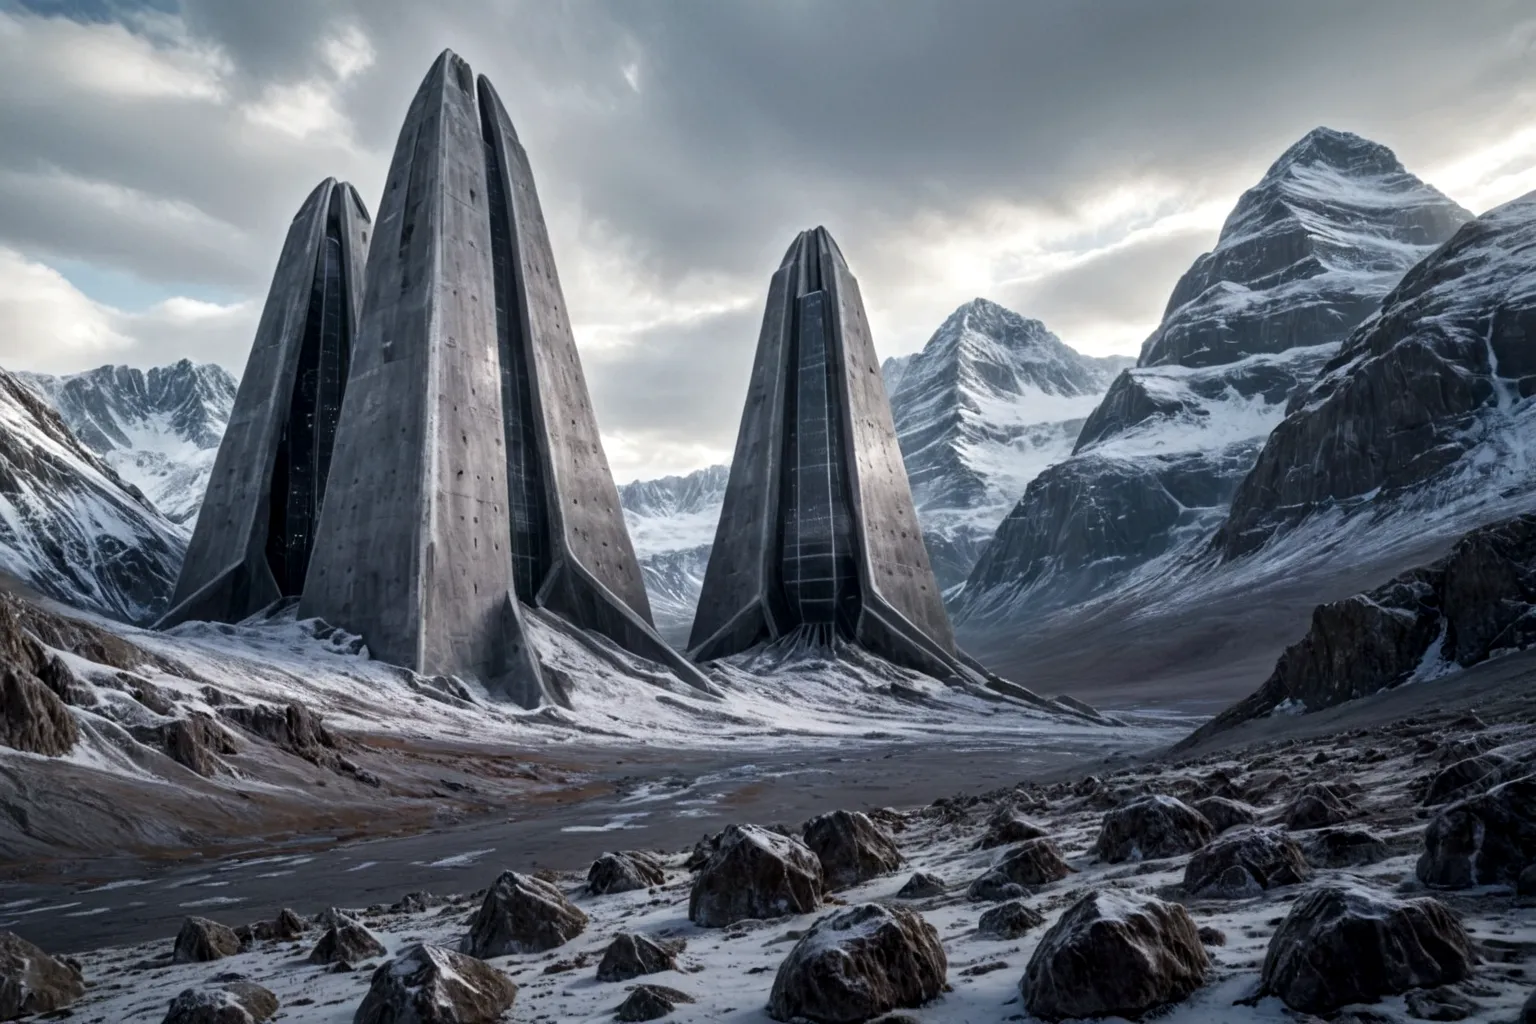 futuristic concrete fortress ON AN ALIEN PLANET STEEP AND INTRINSIC MOUNTAINS WITH SHARP ROCKS WITH SNOW AND ICE, EL CIELO TORME...